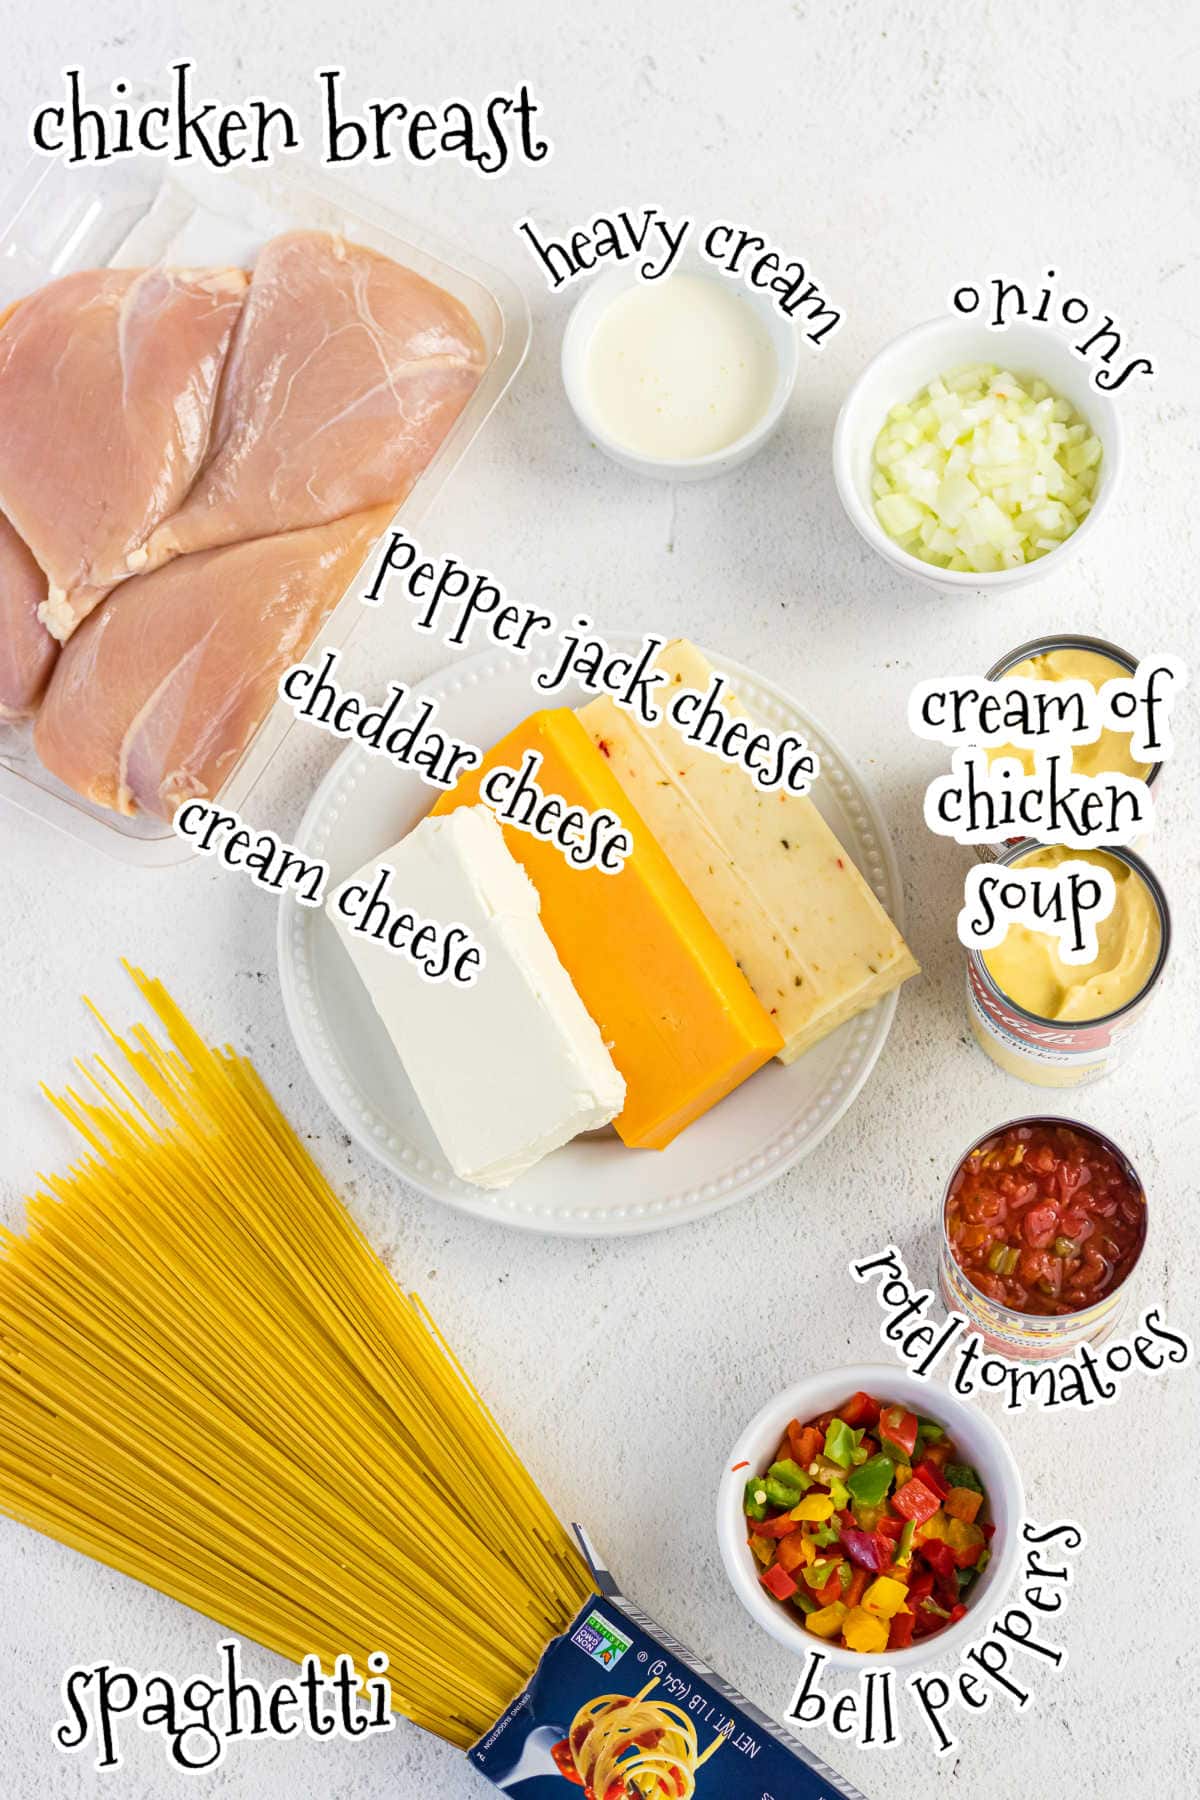 Overhead view of the labeled ingredients for this recipe.